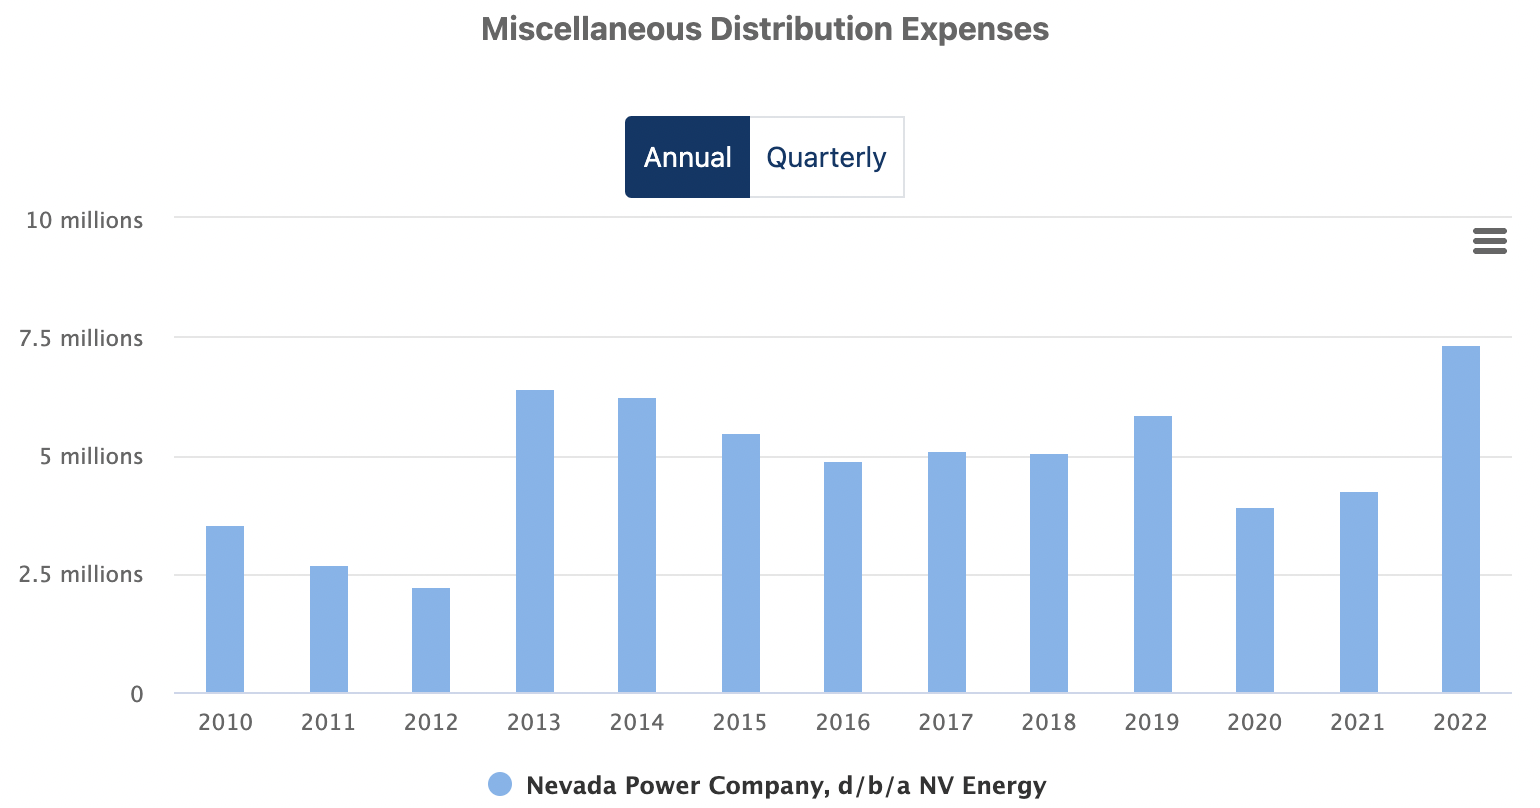 Image of Miscellaneous Distribution Expenses